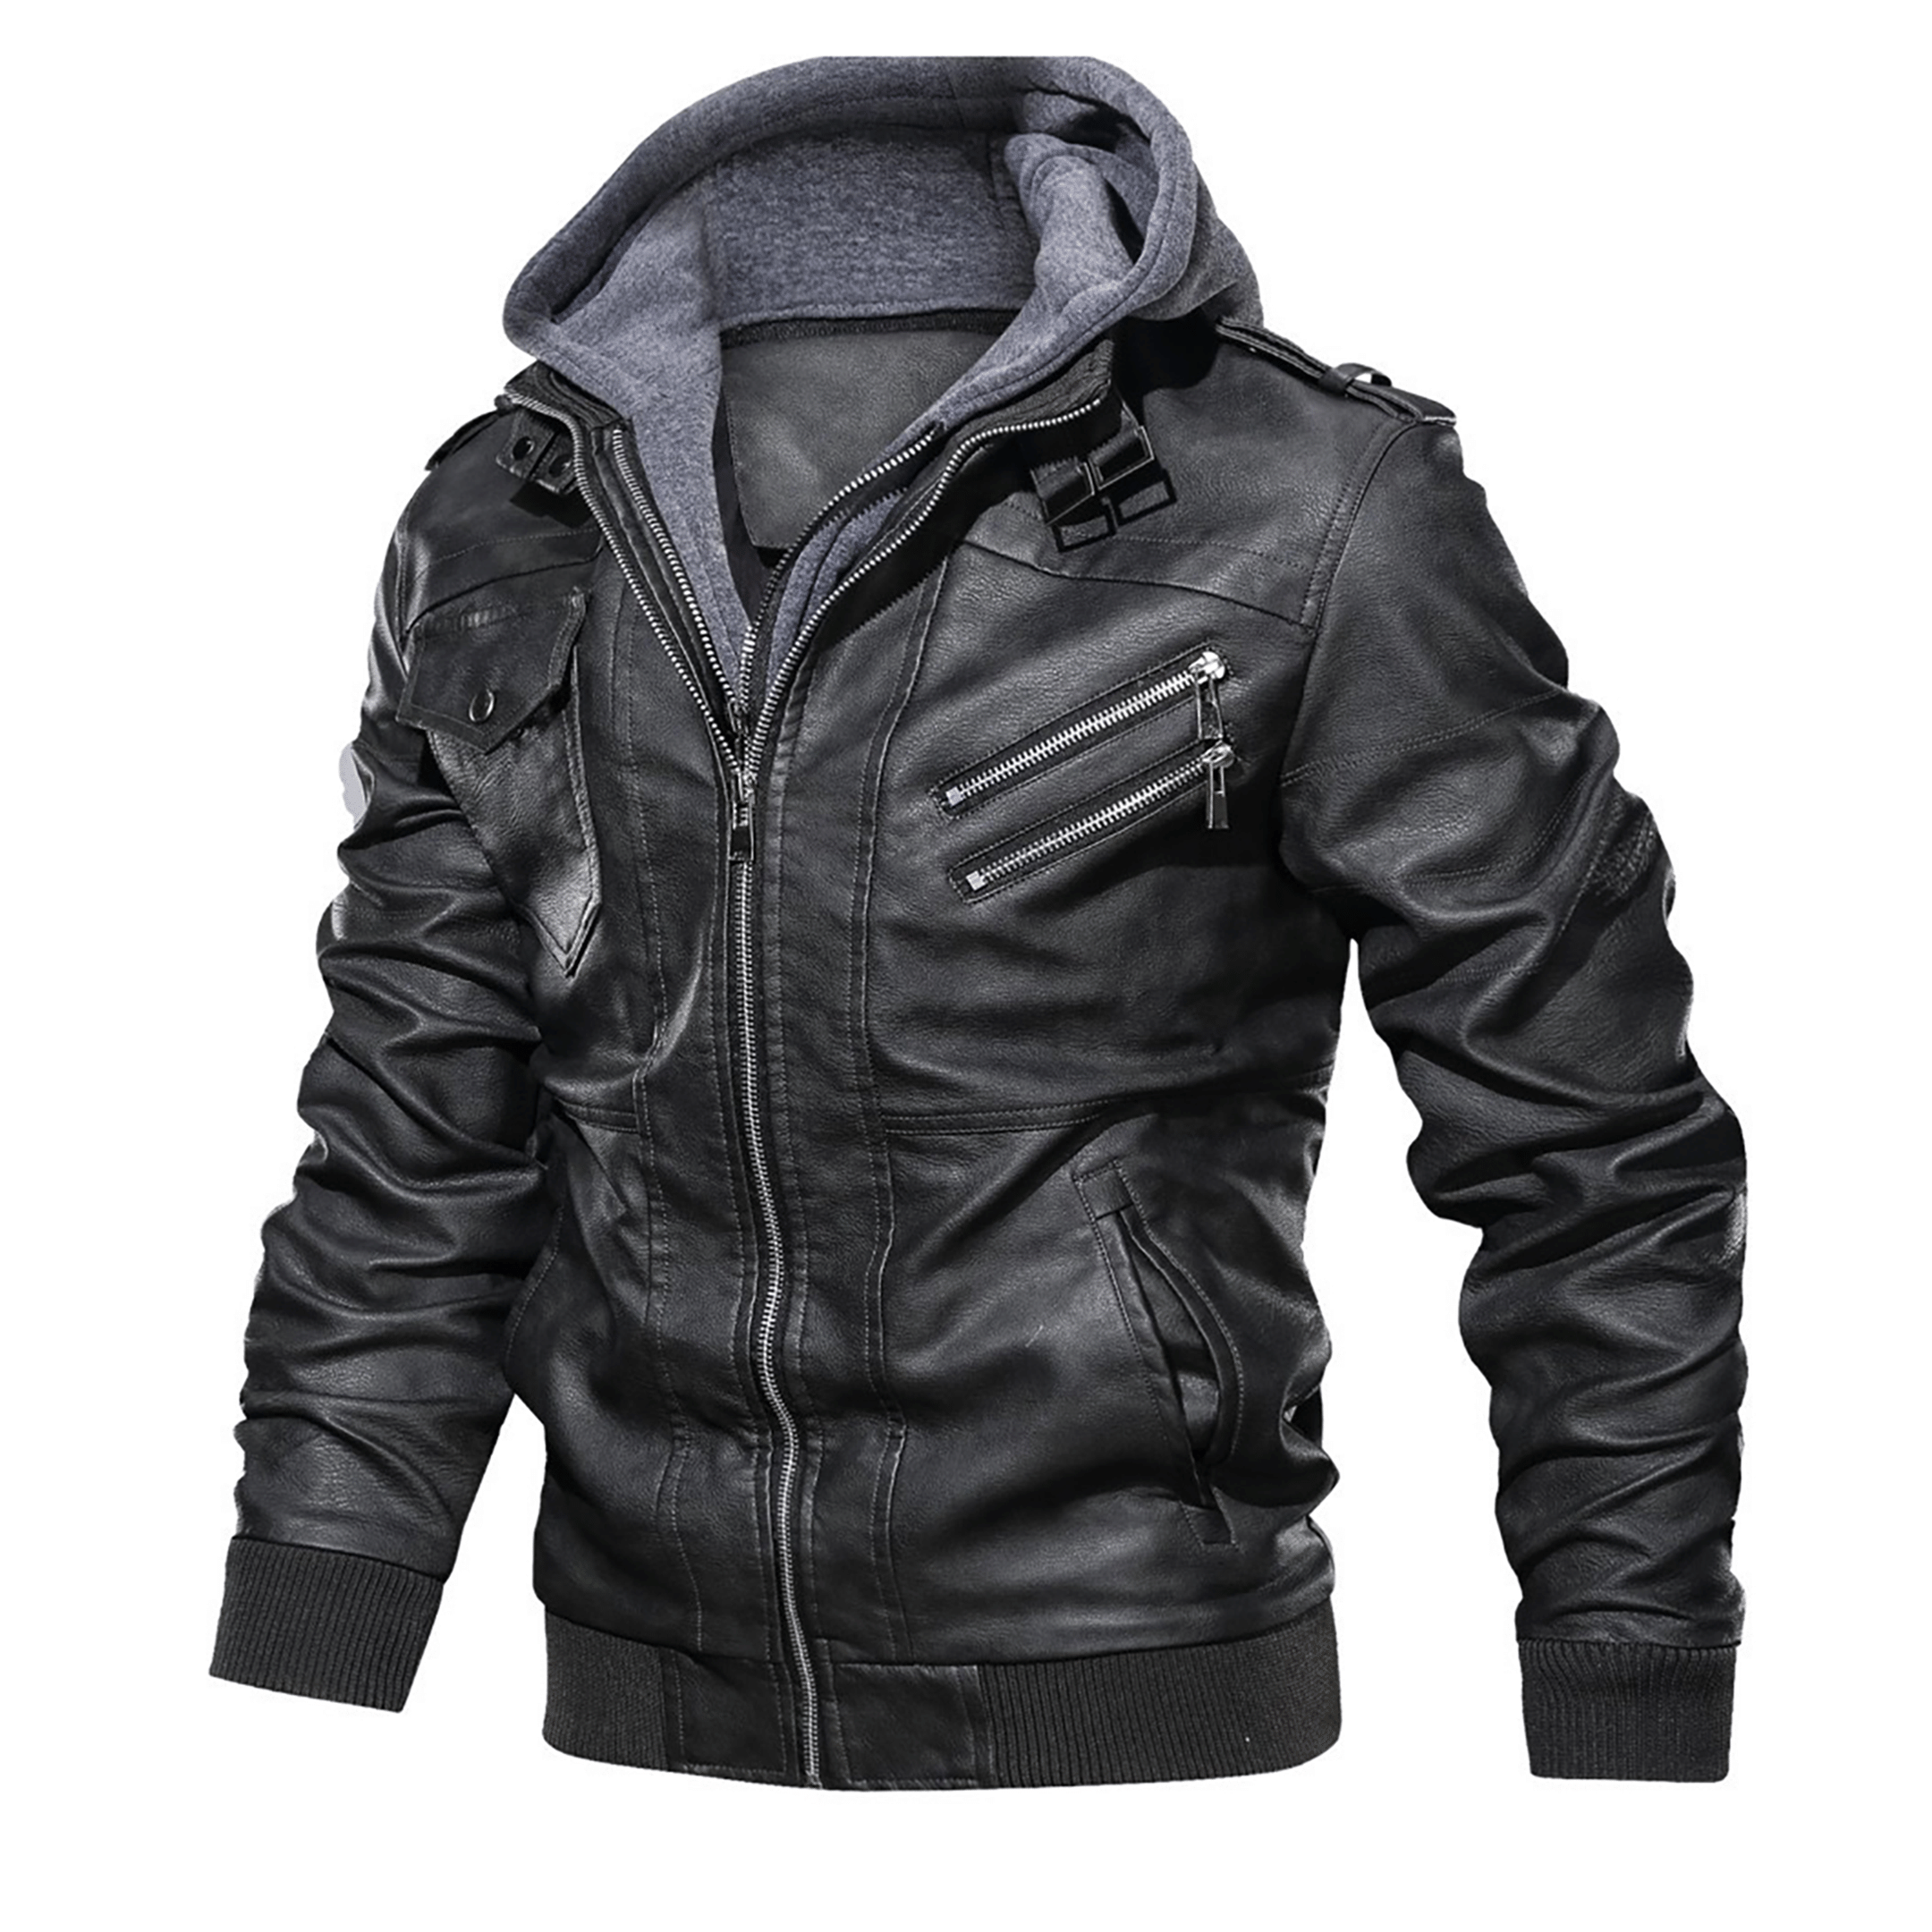 Top leather jackets and latest products 413